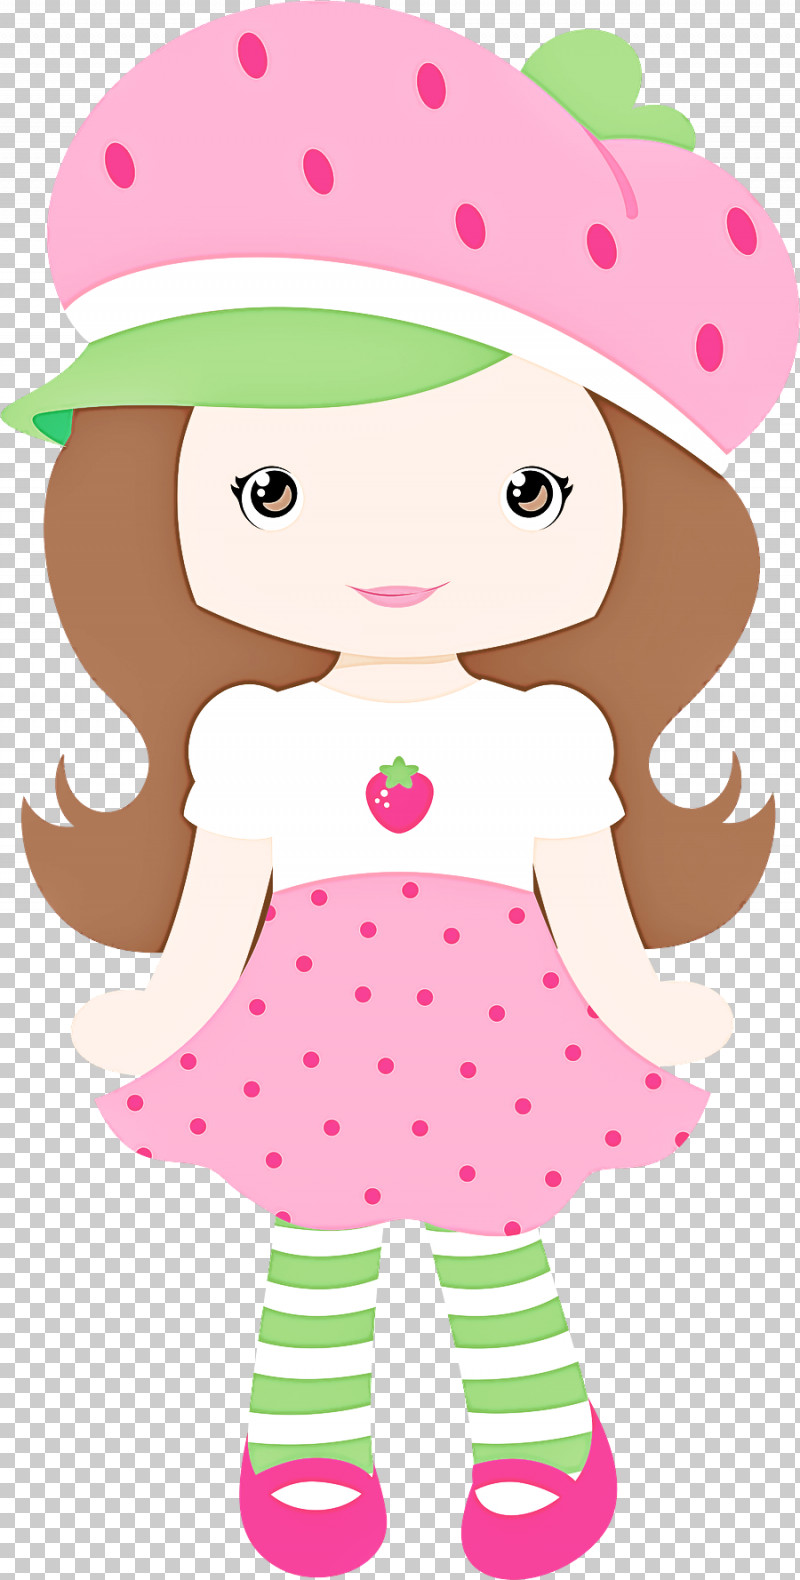 Hello Kitty PNG, Clipart, Barbie, Blog, Cartoon, Doll, Drawing Free PNG  Download